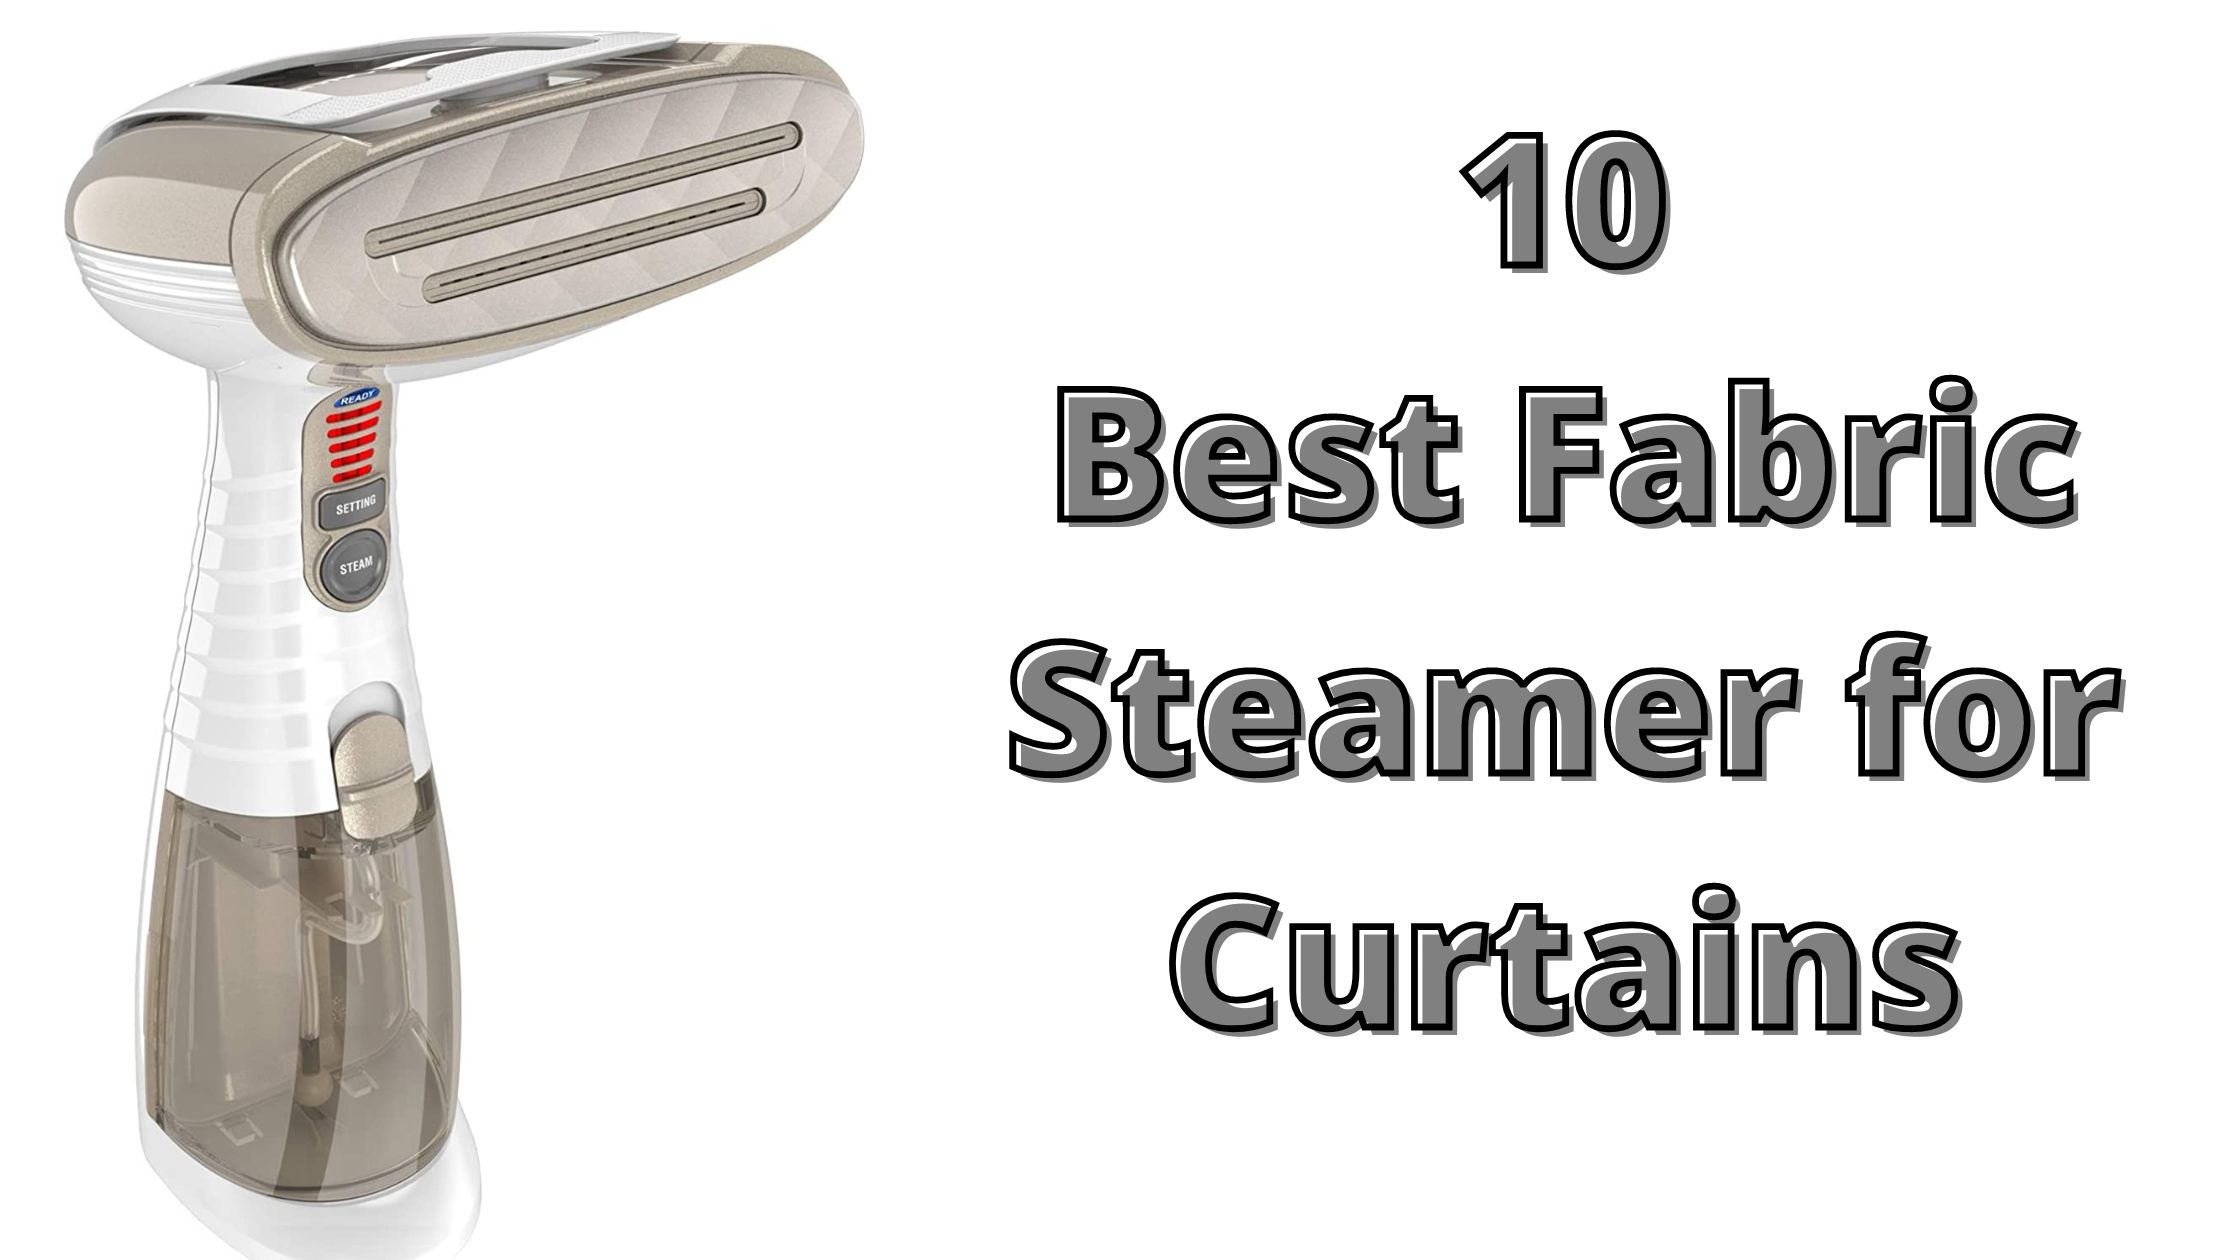 Best Fabric Steamer for Curtains